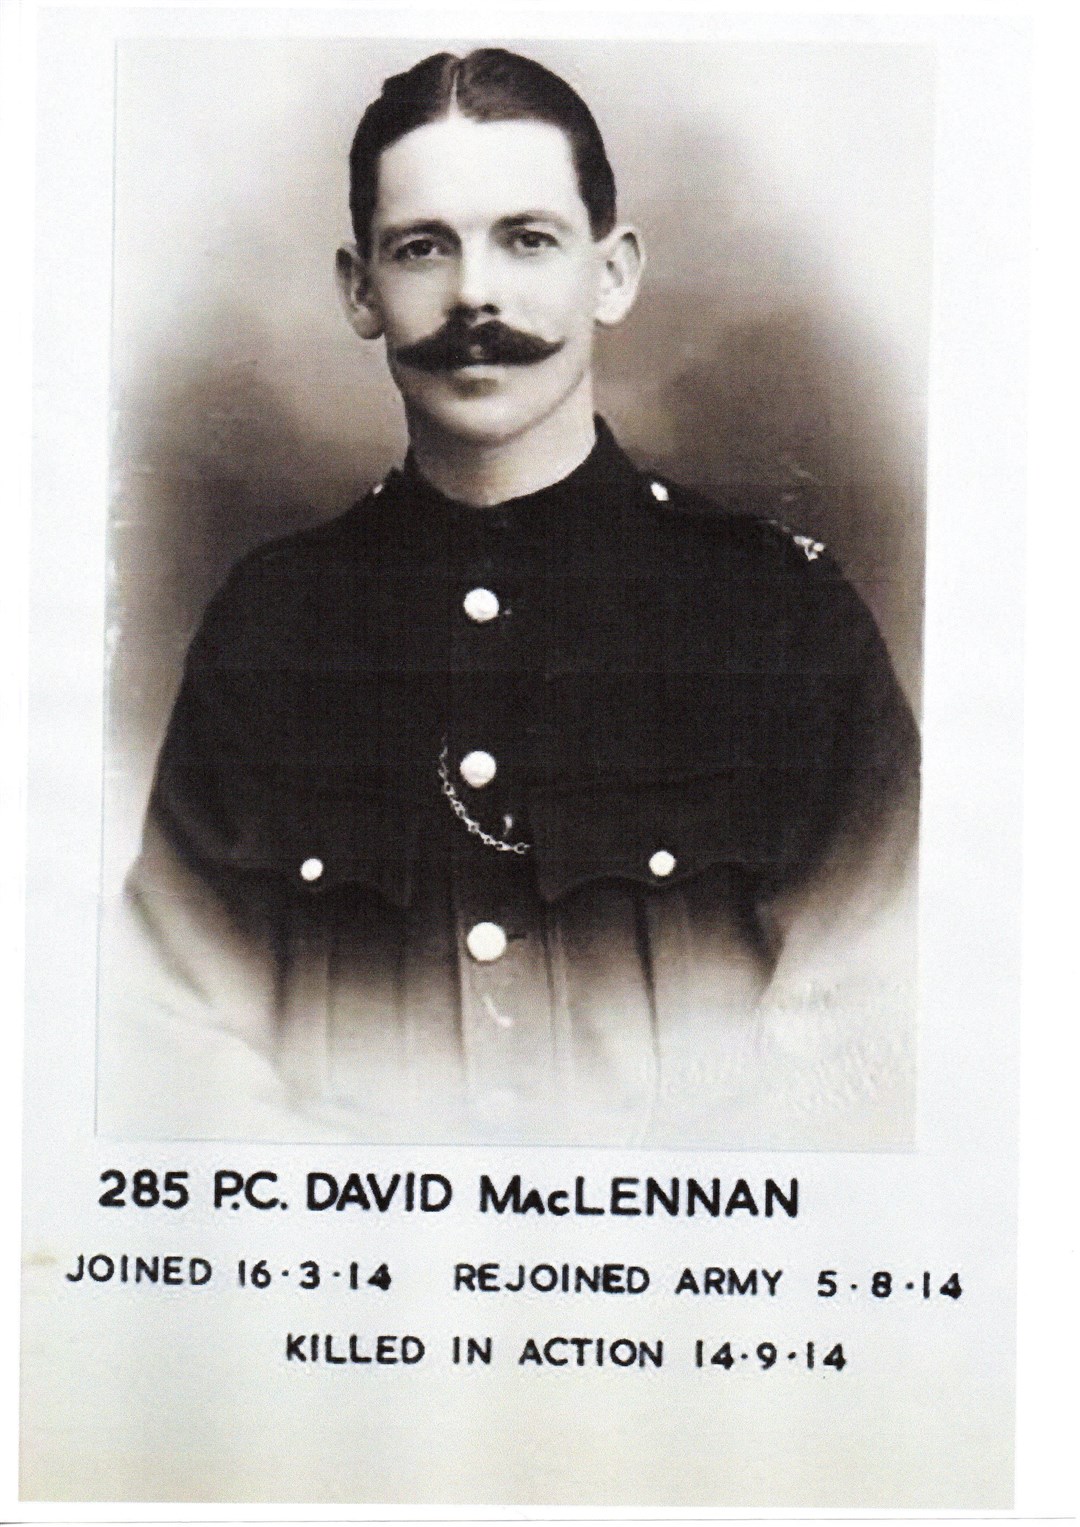 Avoch-born Corporal David Bain MacLeman, whose name appears in a variety of spellings, has been added to the Scottish National War Memorial at Edinburgh Castle.